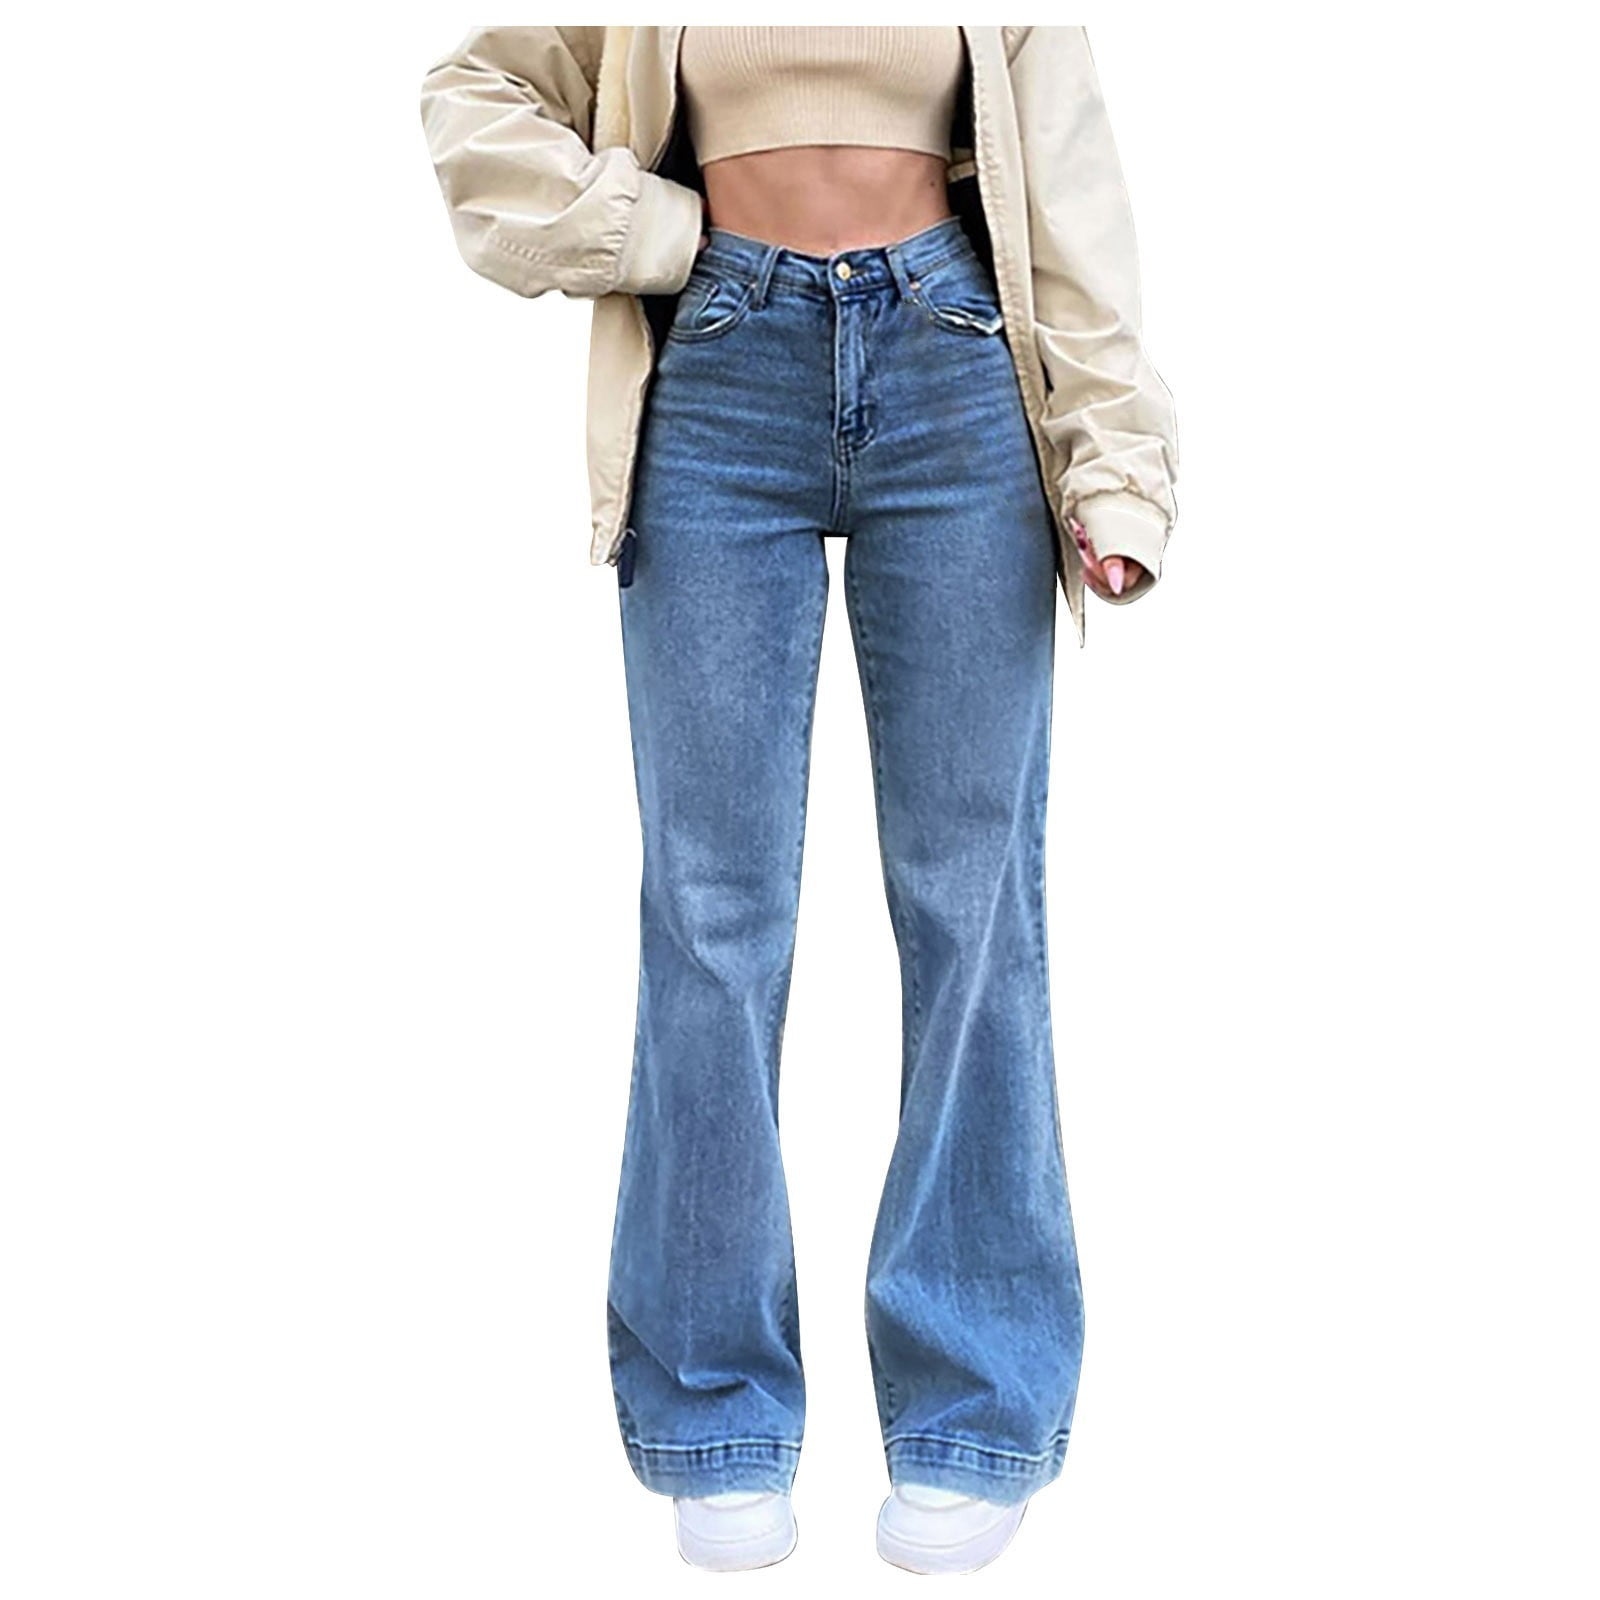 JDEFEG Pants for Women Size 12 Women's High Elastic High Waist Trousers  Slim Fit Jeans Flare Pants Jean Jackets for Women Women's Pants